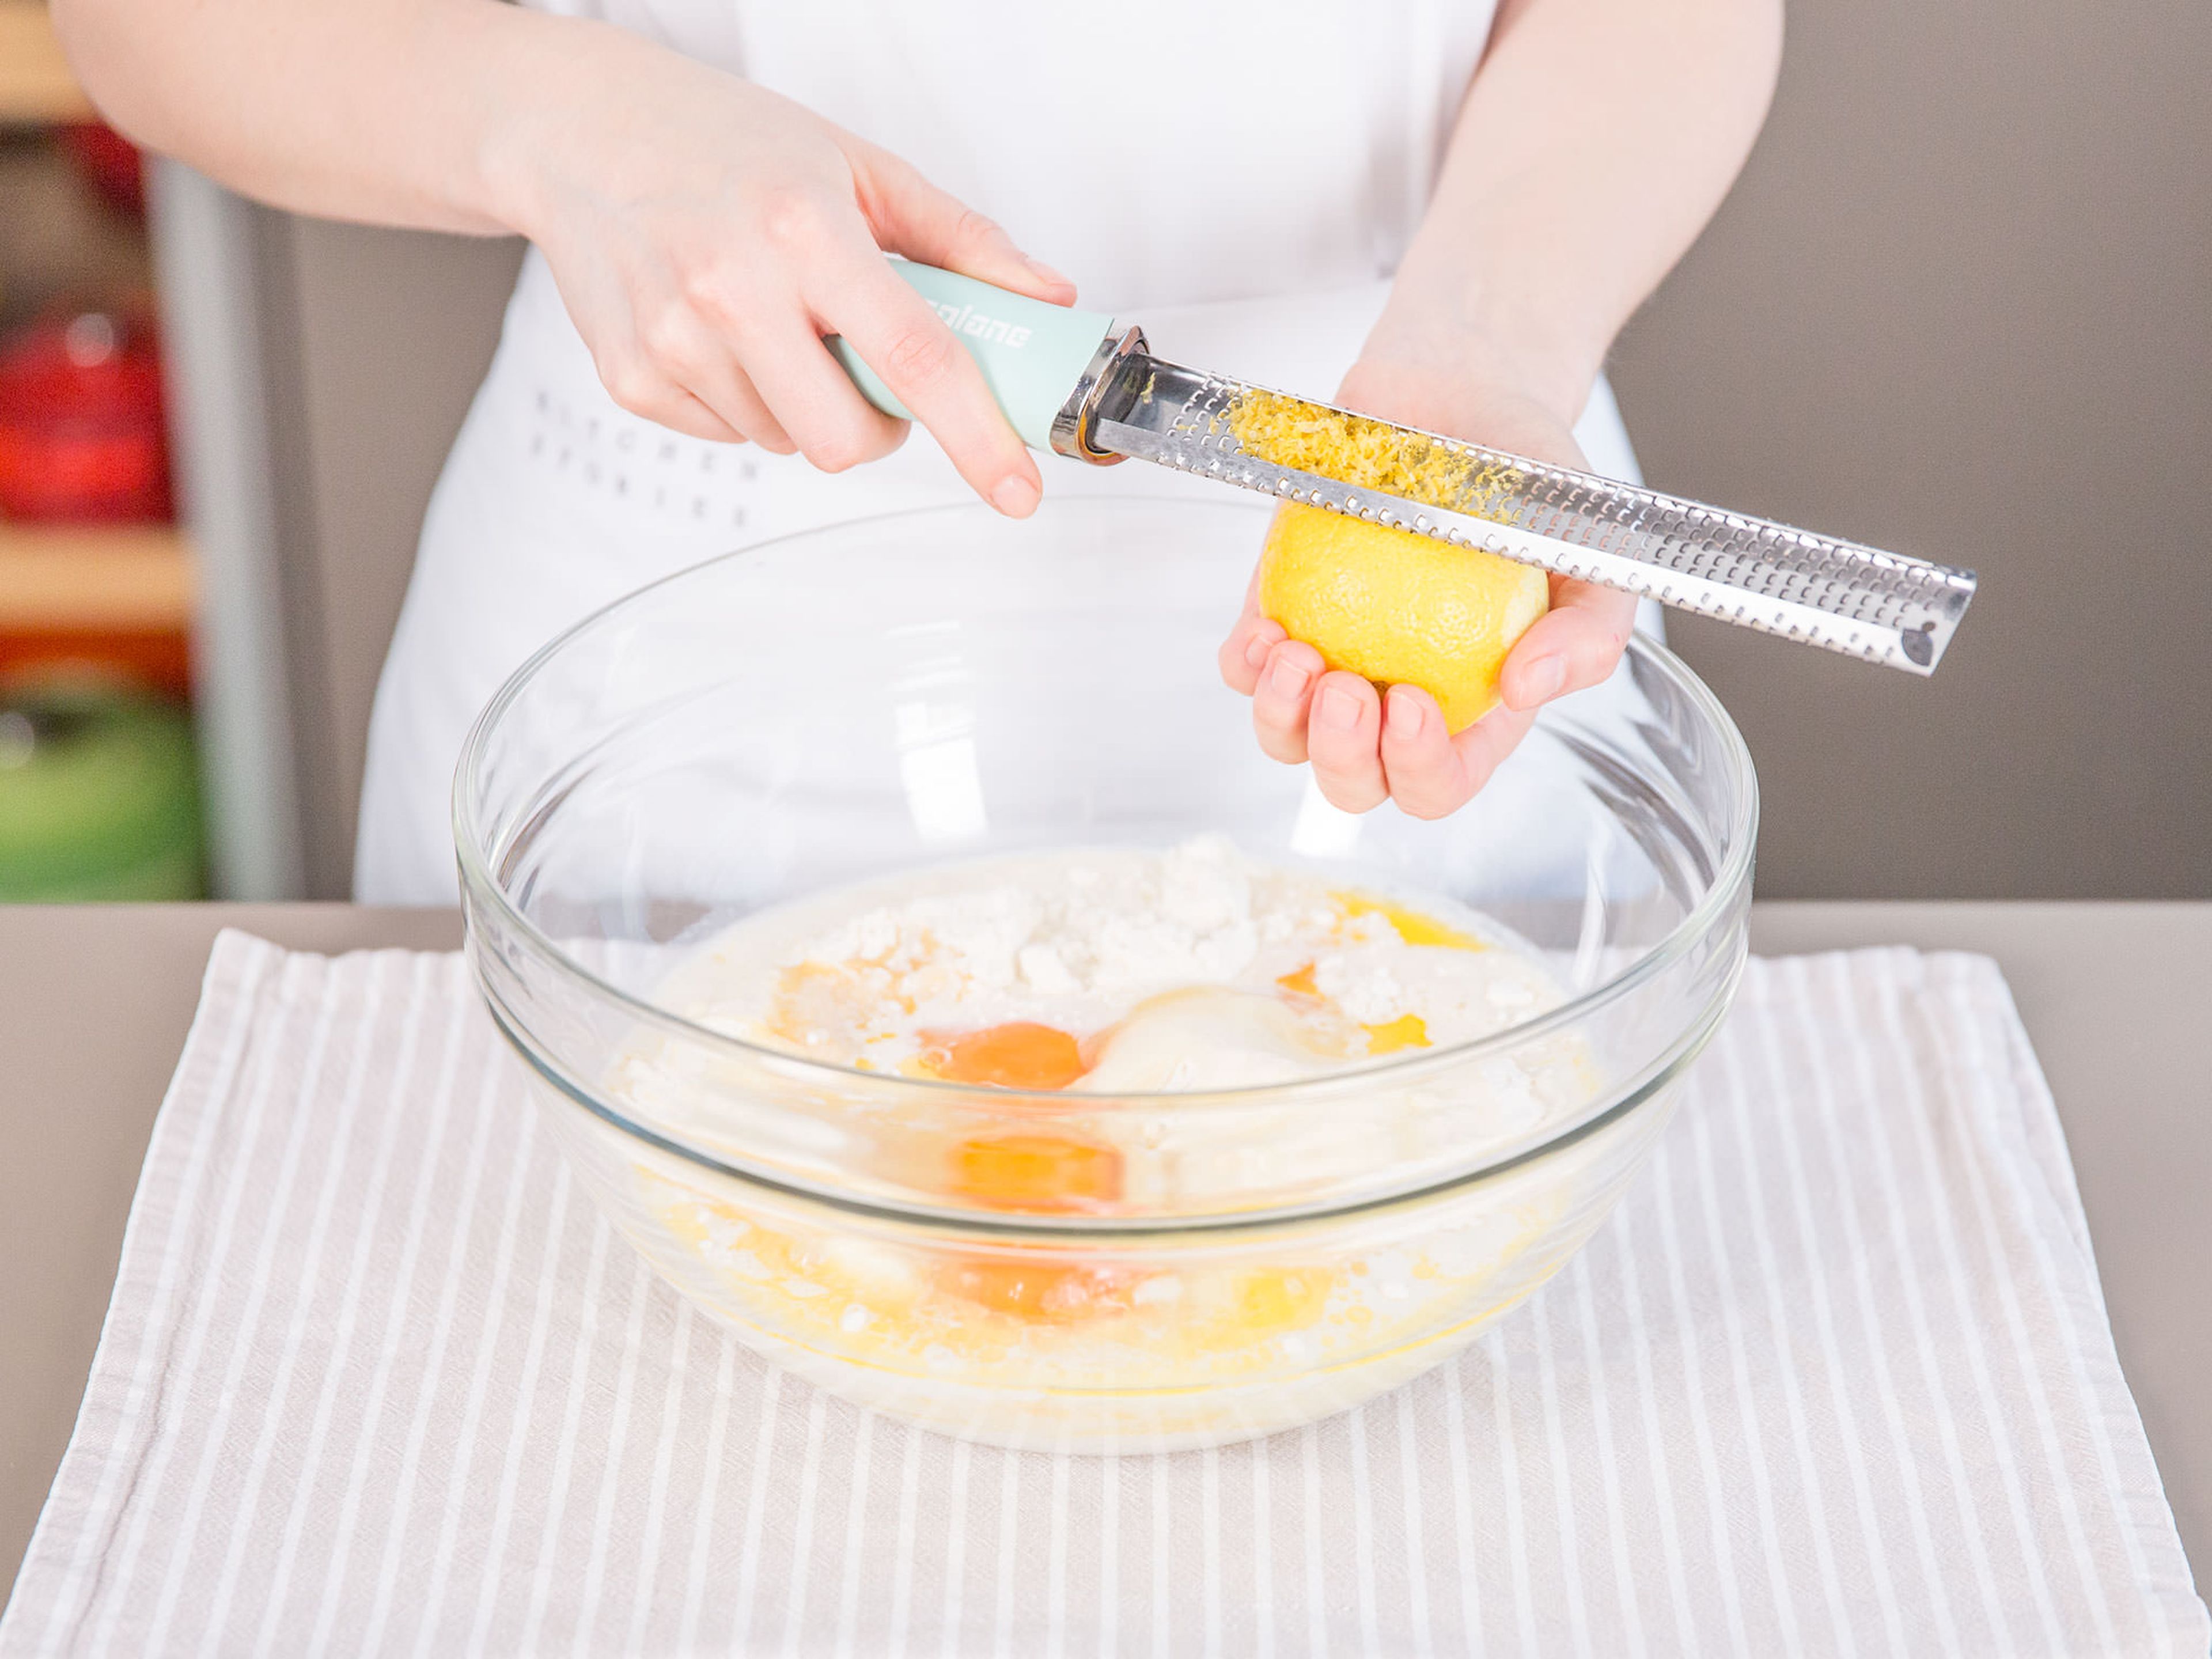 In a large bowl, whisk together flour mixture with milk, eggs, melted butter, and lemon zest until smooth. For best results, cover bowl with plastic wrap and set aside to rest for at least an hour or refrigerated overnight.